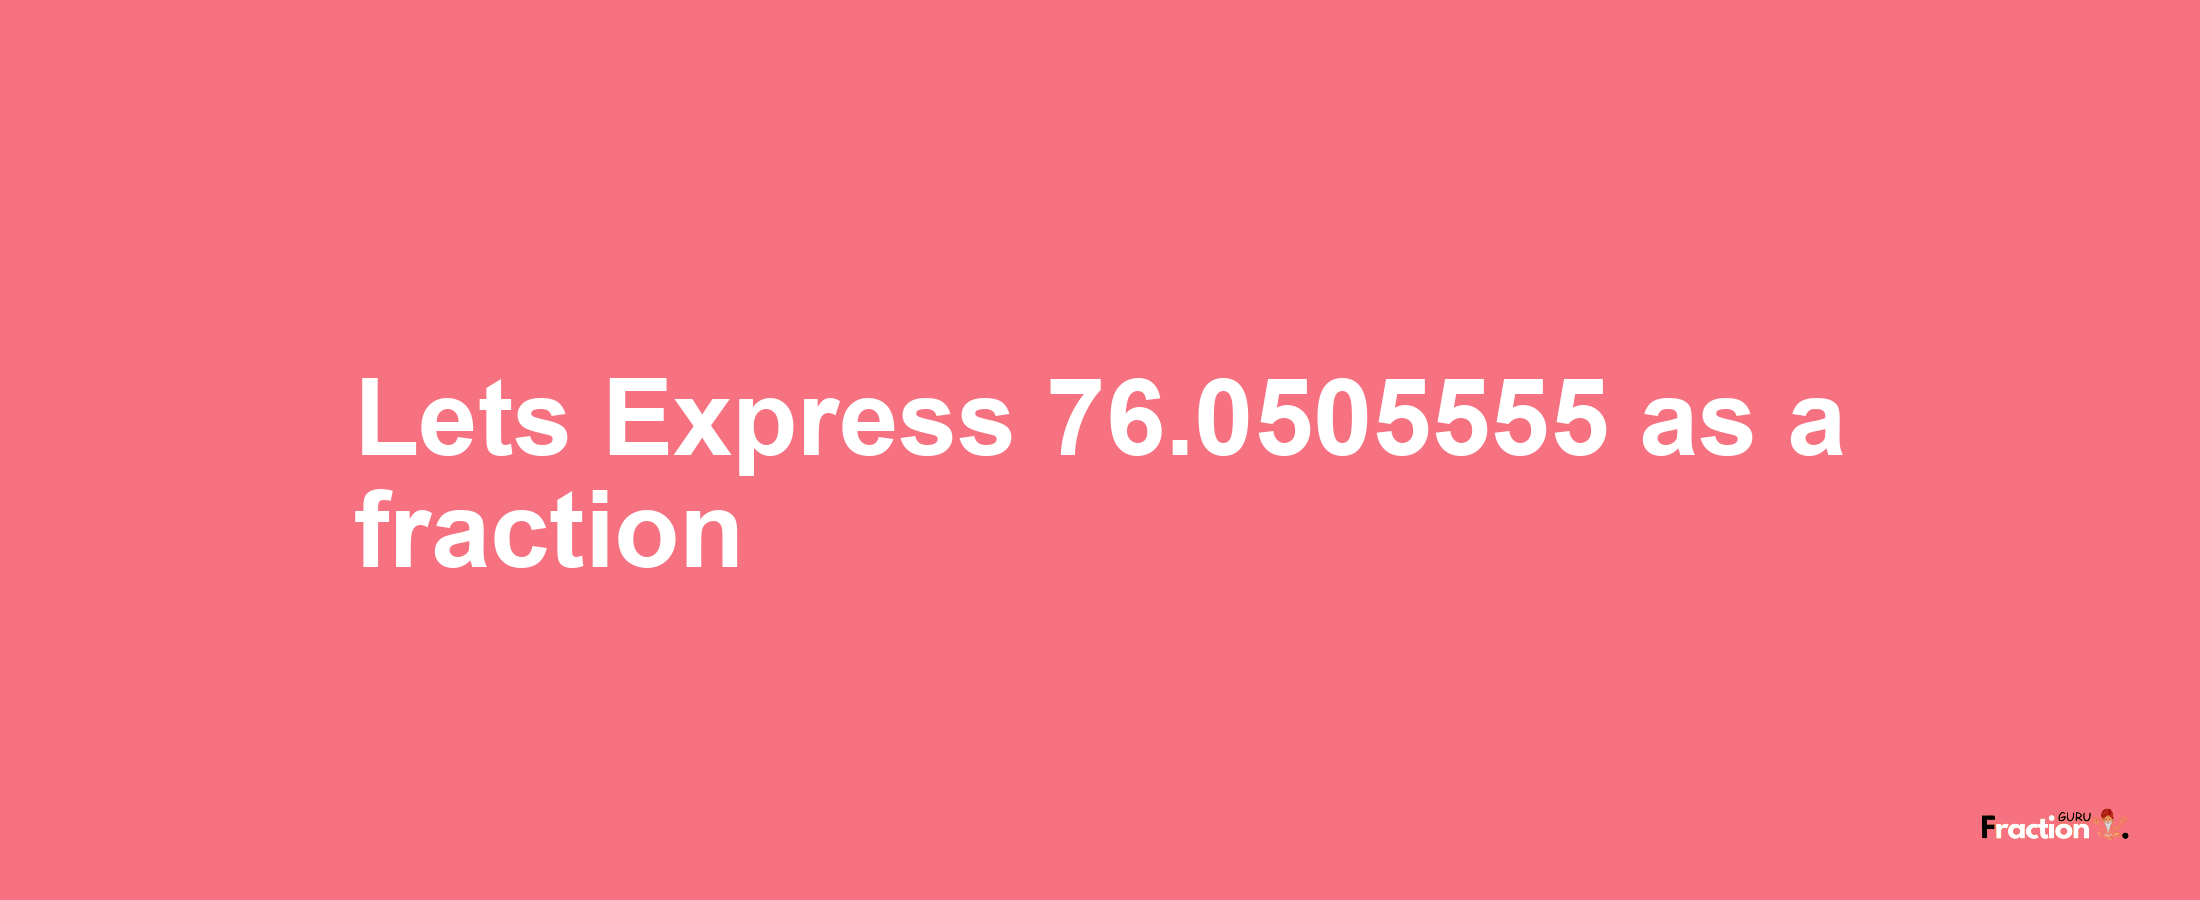 Lets Express 76.0505555 as afraction